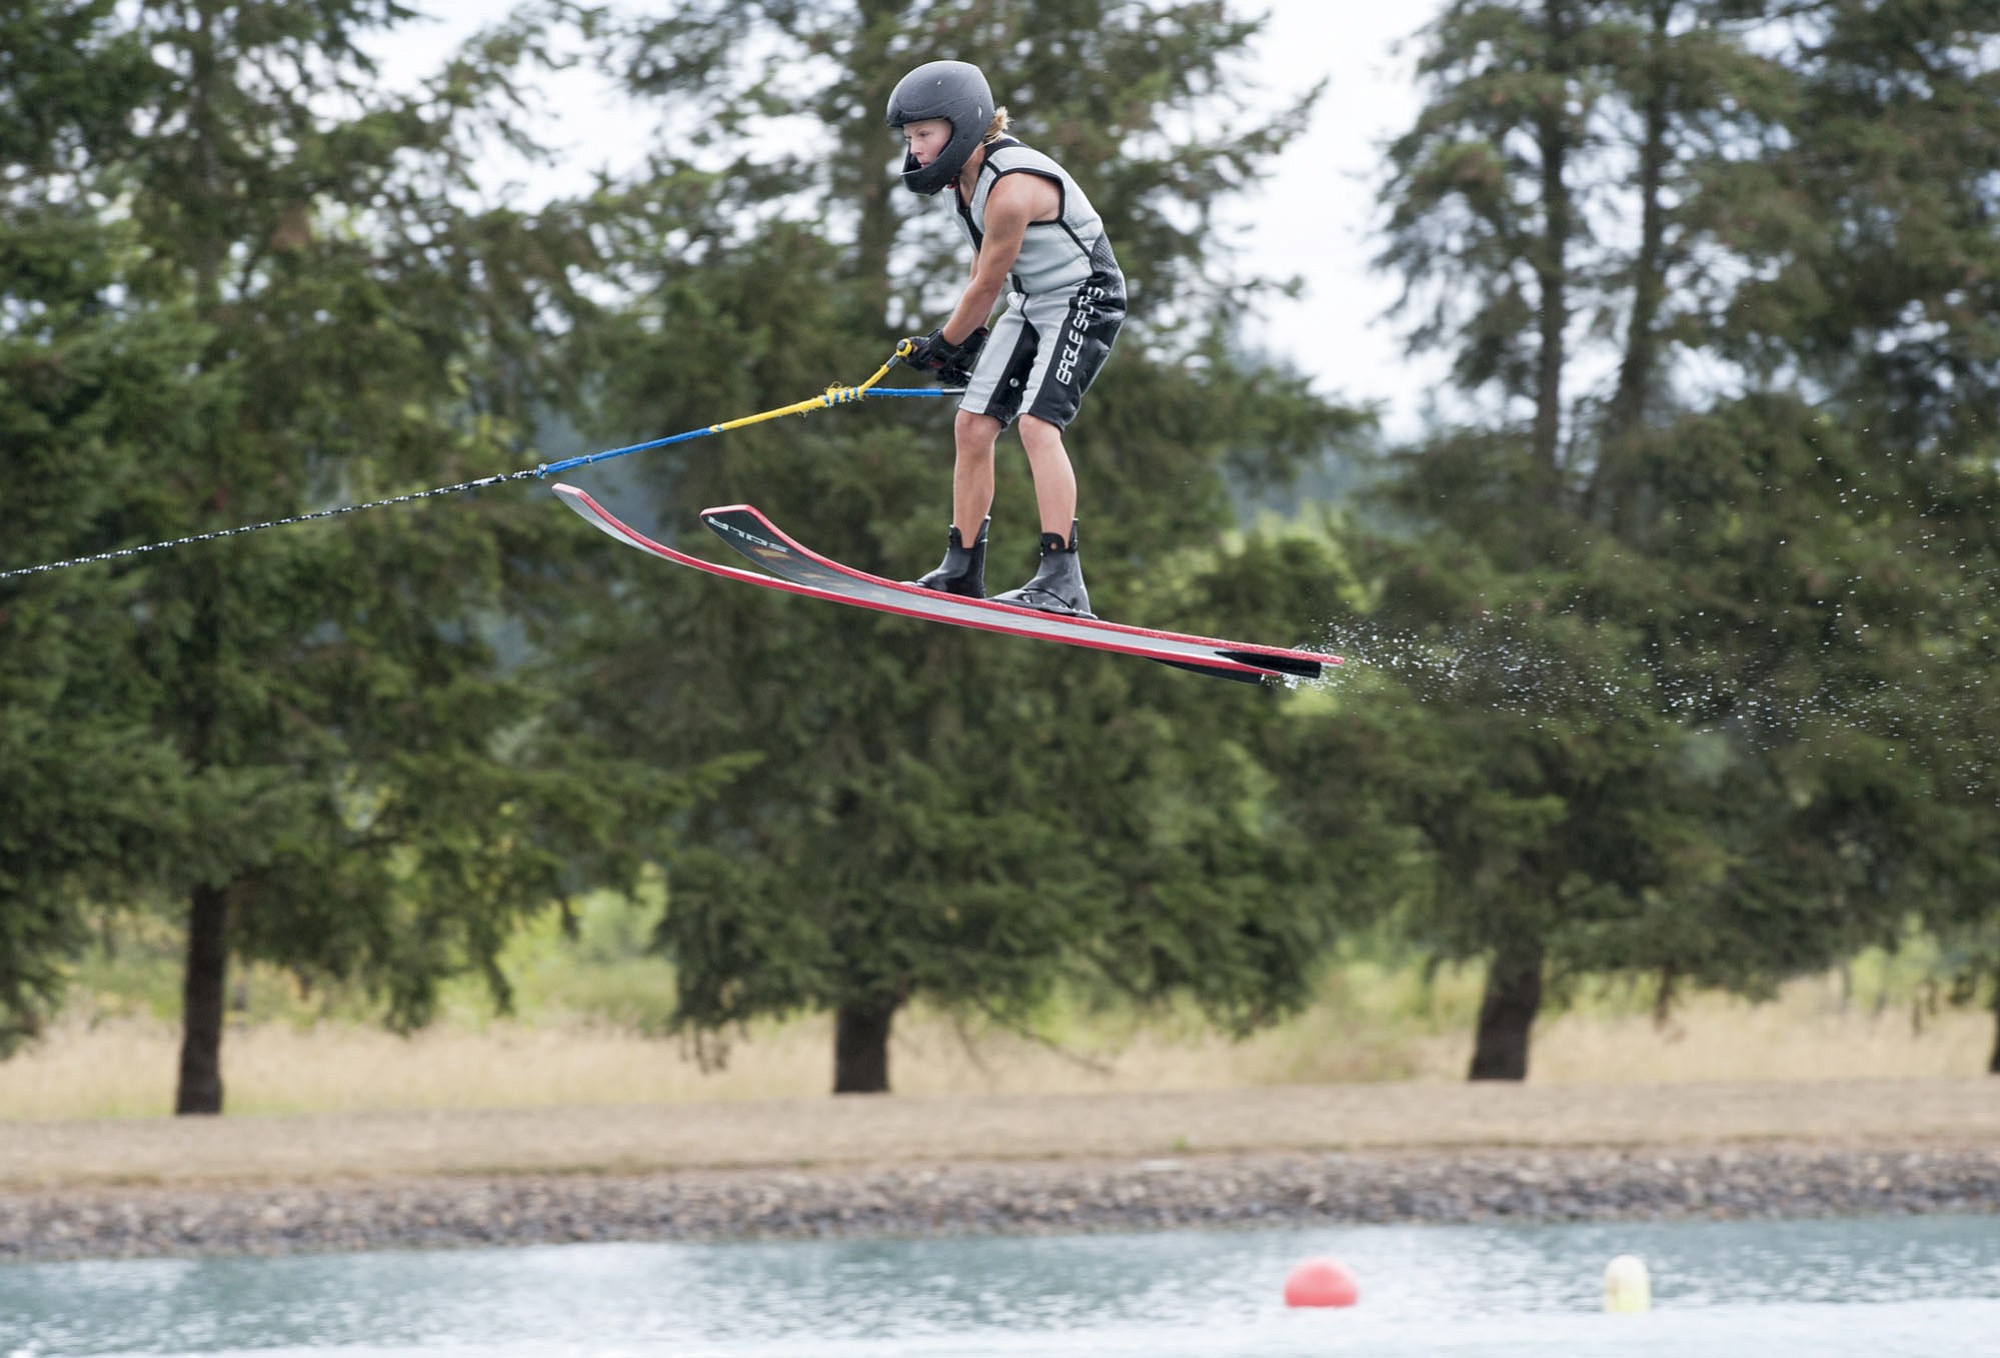 Fletcher Holm competes at the 2015 Western Regional Waterski Championships.